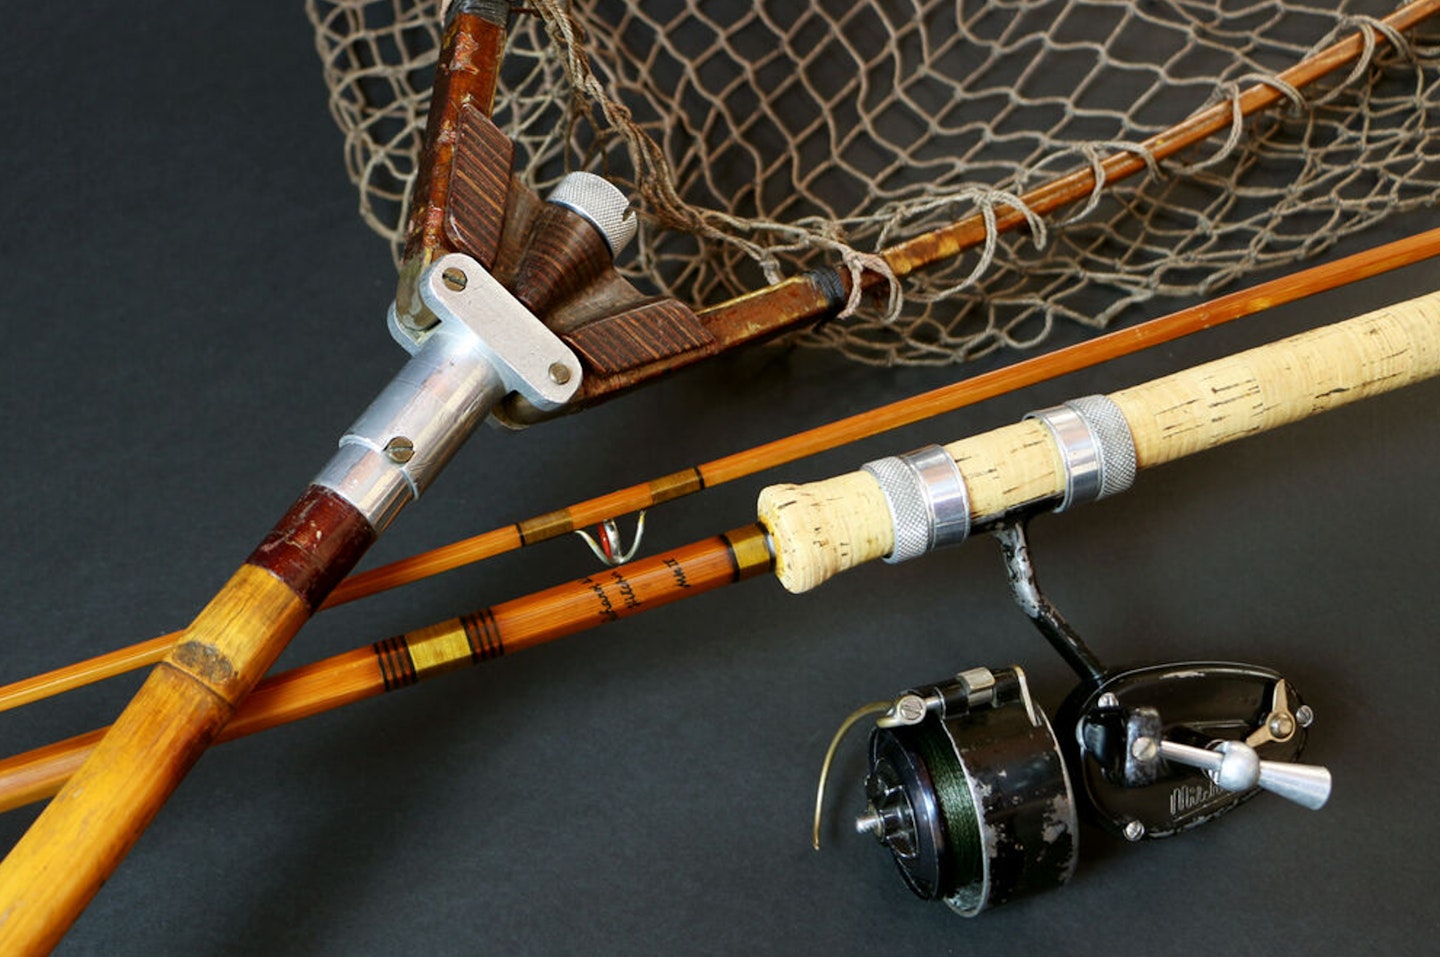 The rod, reel, and landing net used to land ‘Clarissa’, Dick Walker’s 1952 British record carp